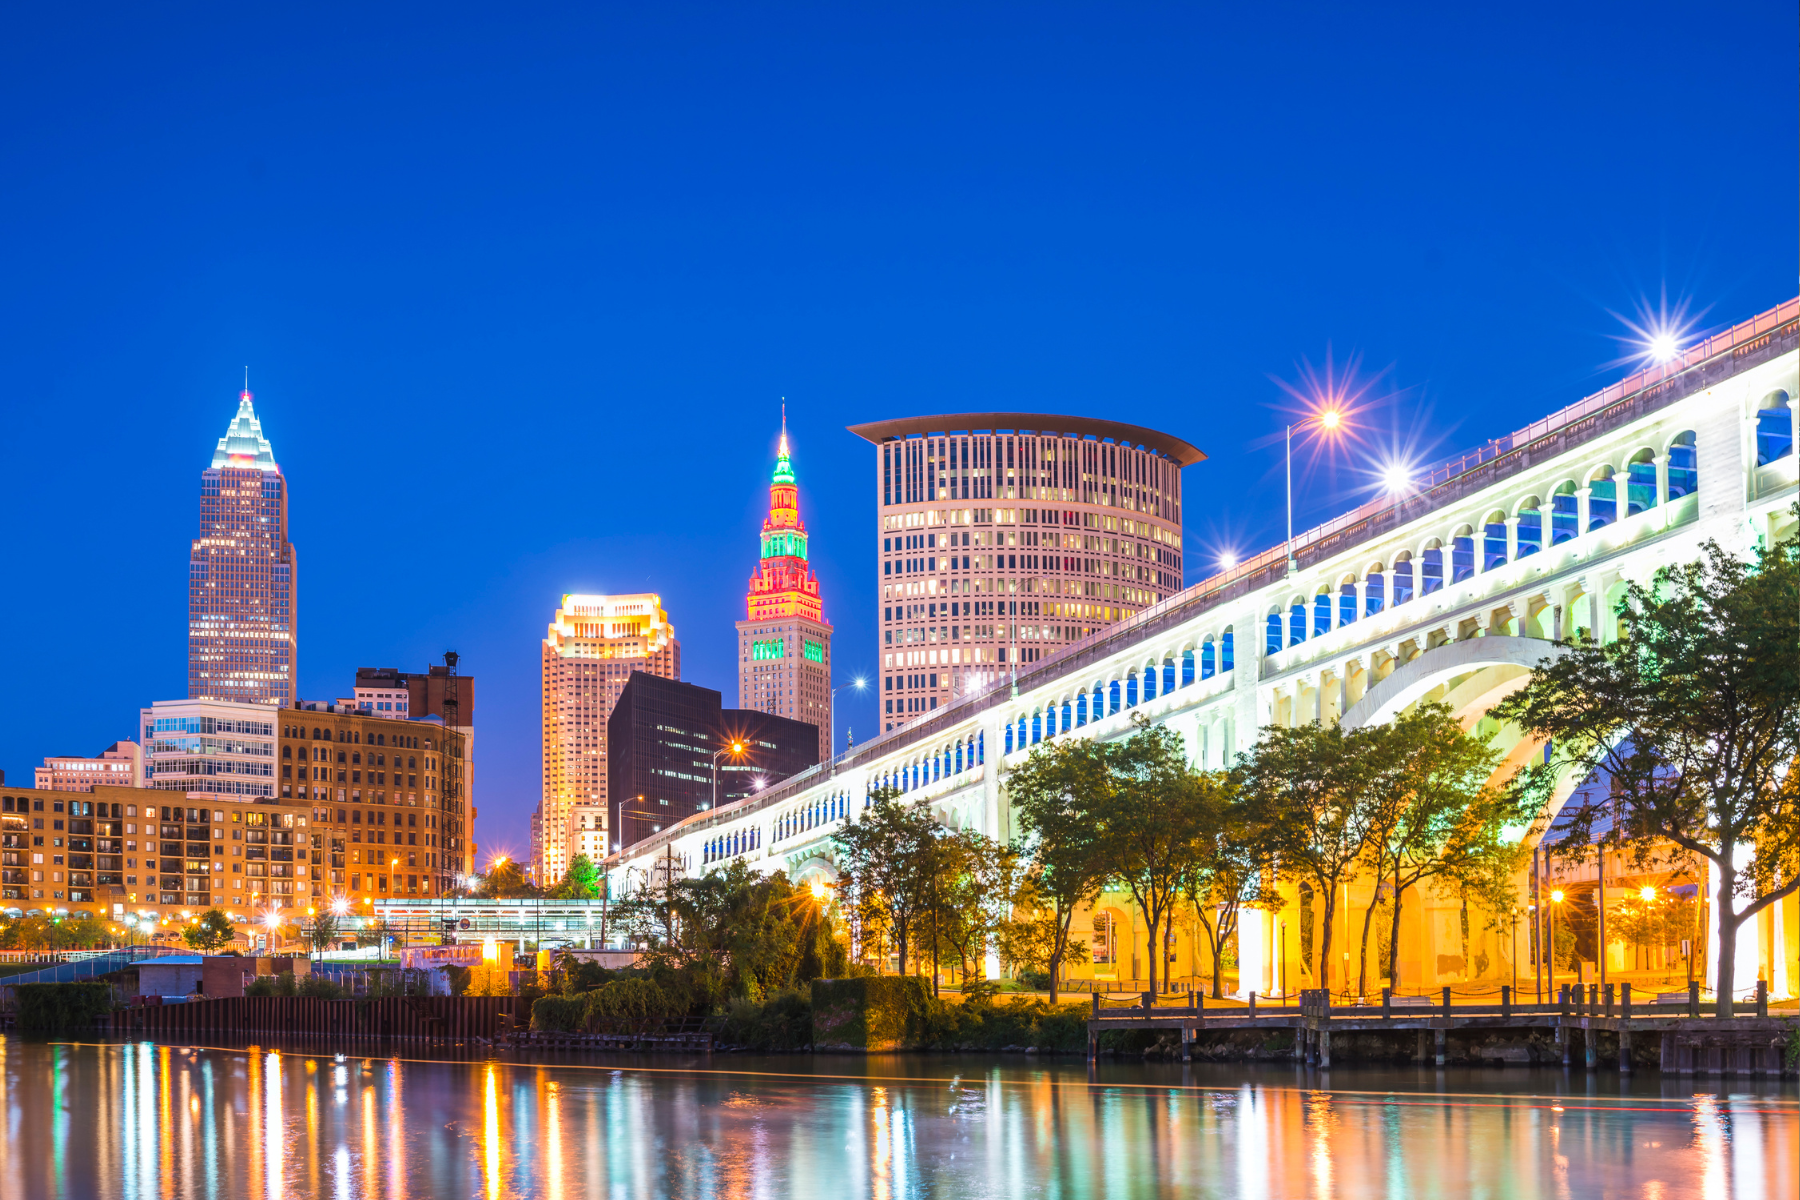 The APTA Rail Conference took place in Cleveland, Ohio earlier this month